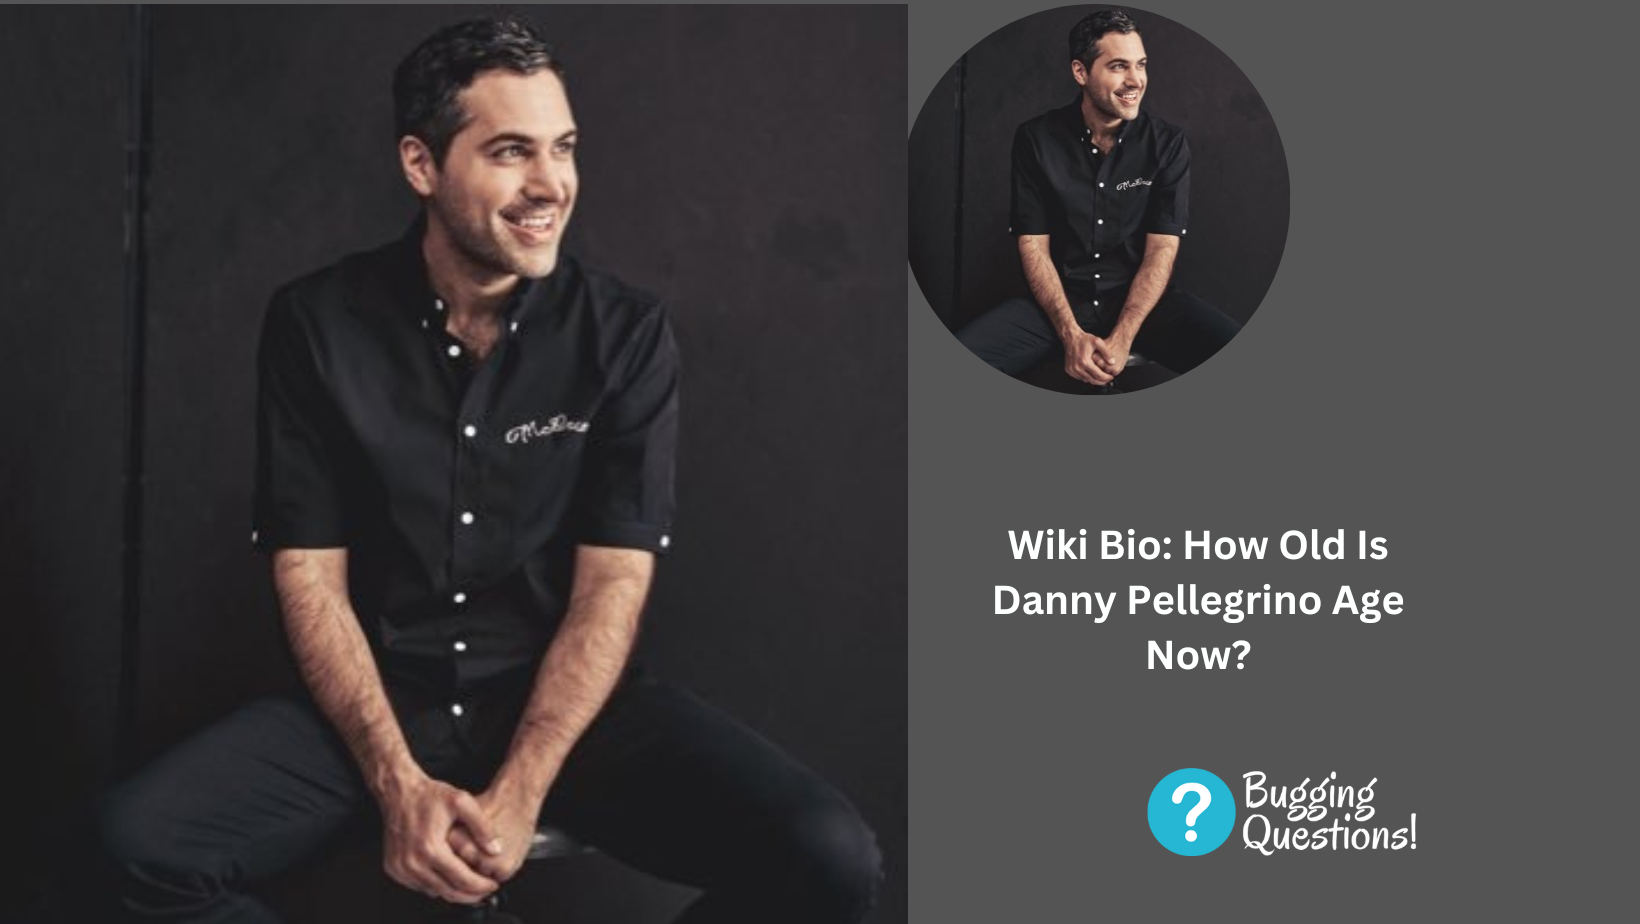 Wiki Bio: How Old Is Danny Pellegrino Age Now?